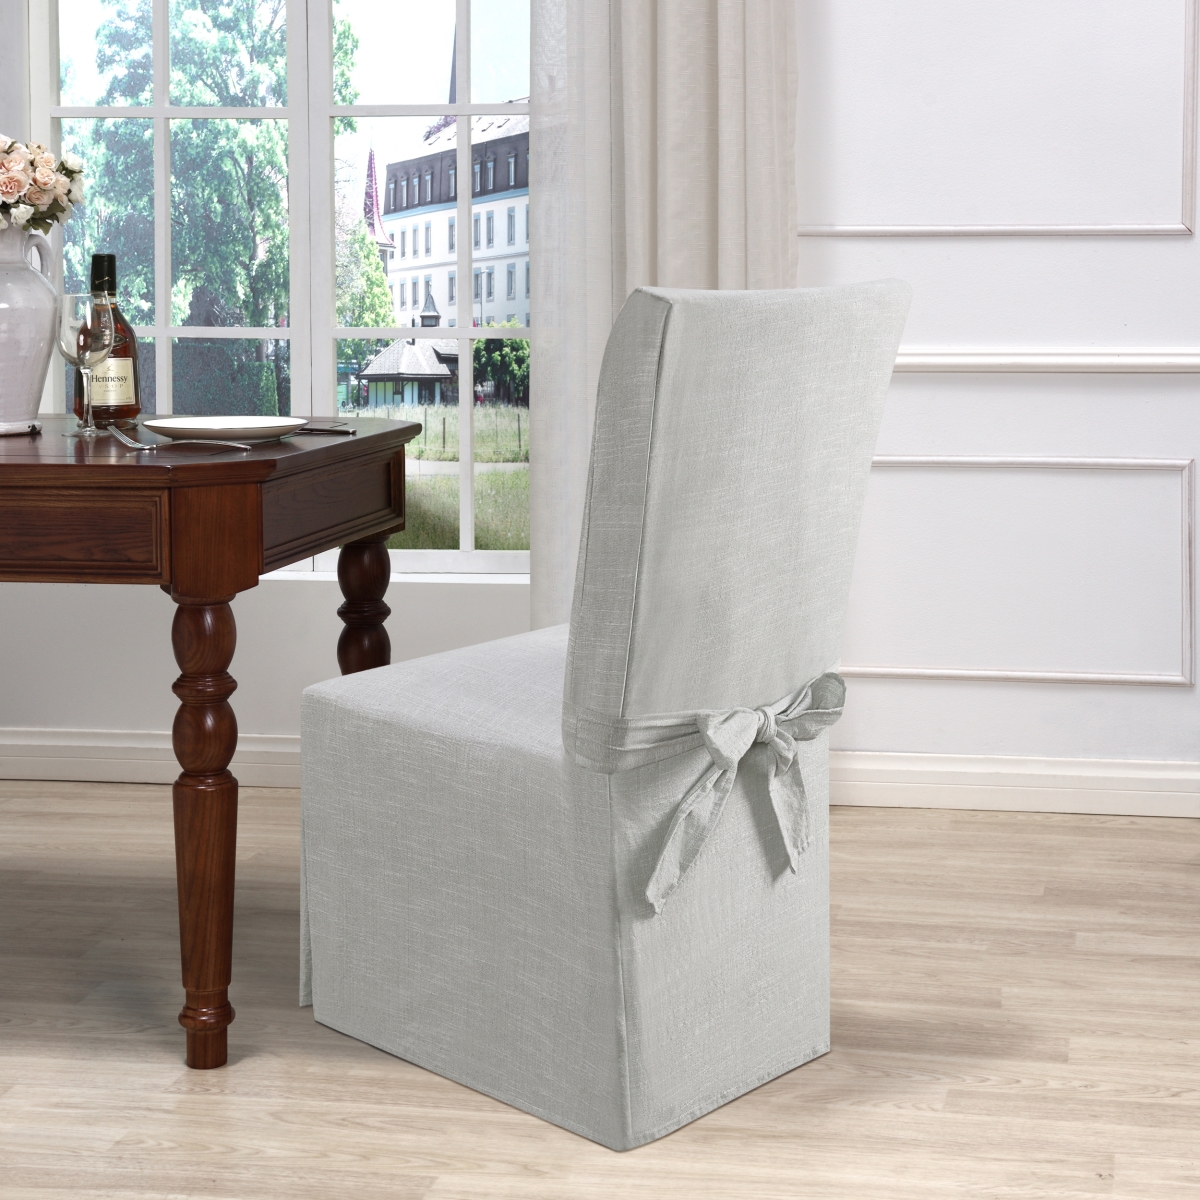 Cha-drc-gy Chateau Dining Chair Cover, Gray